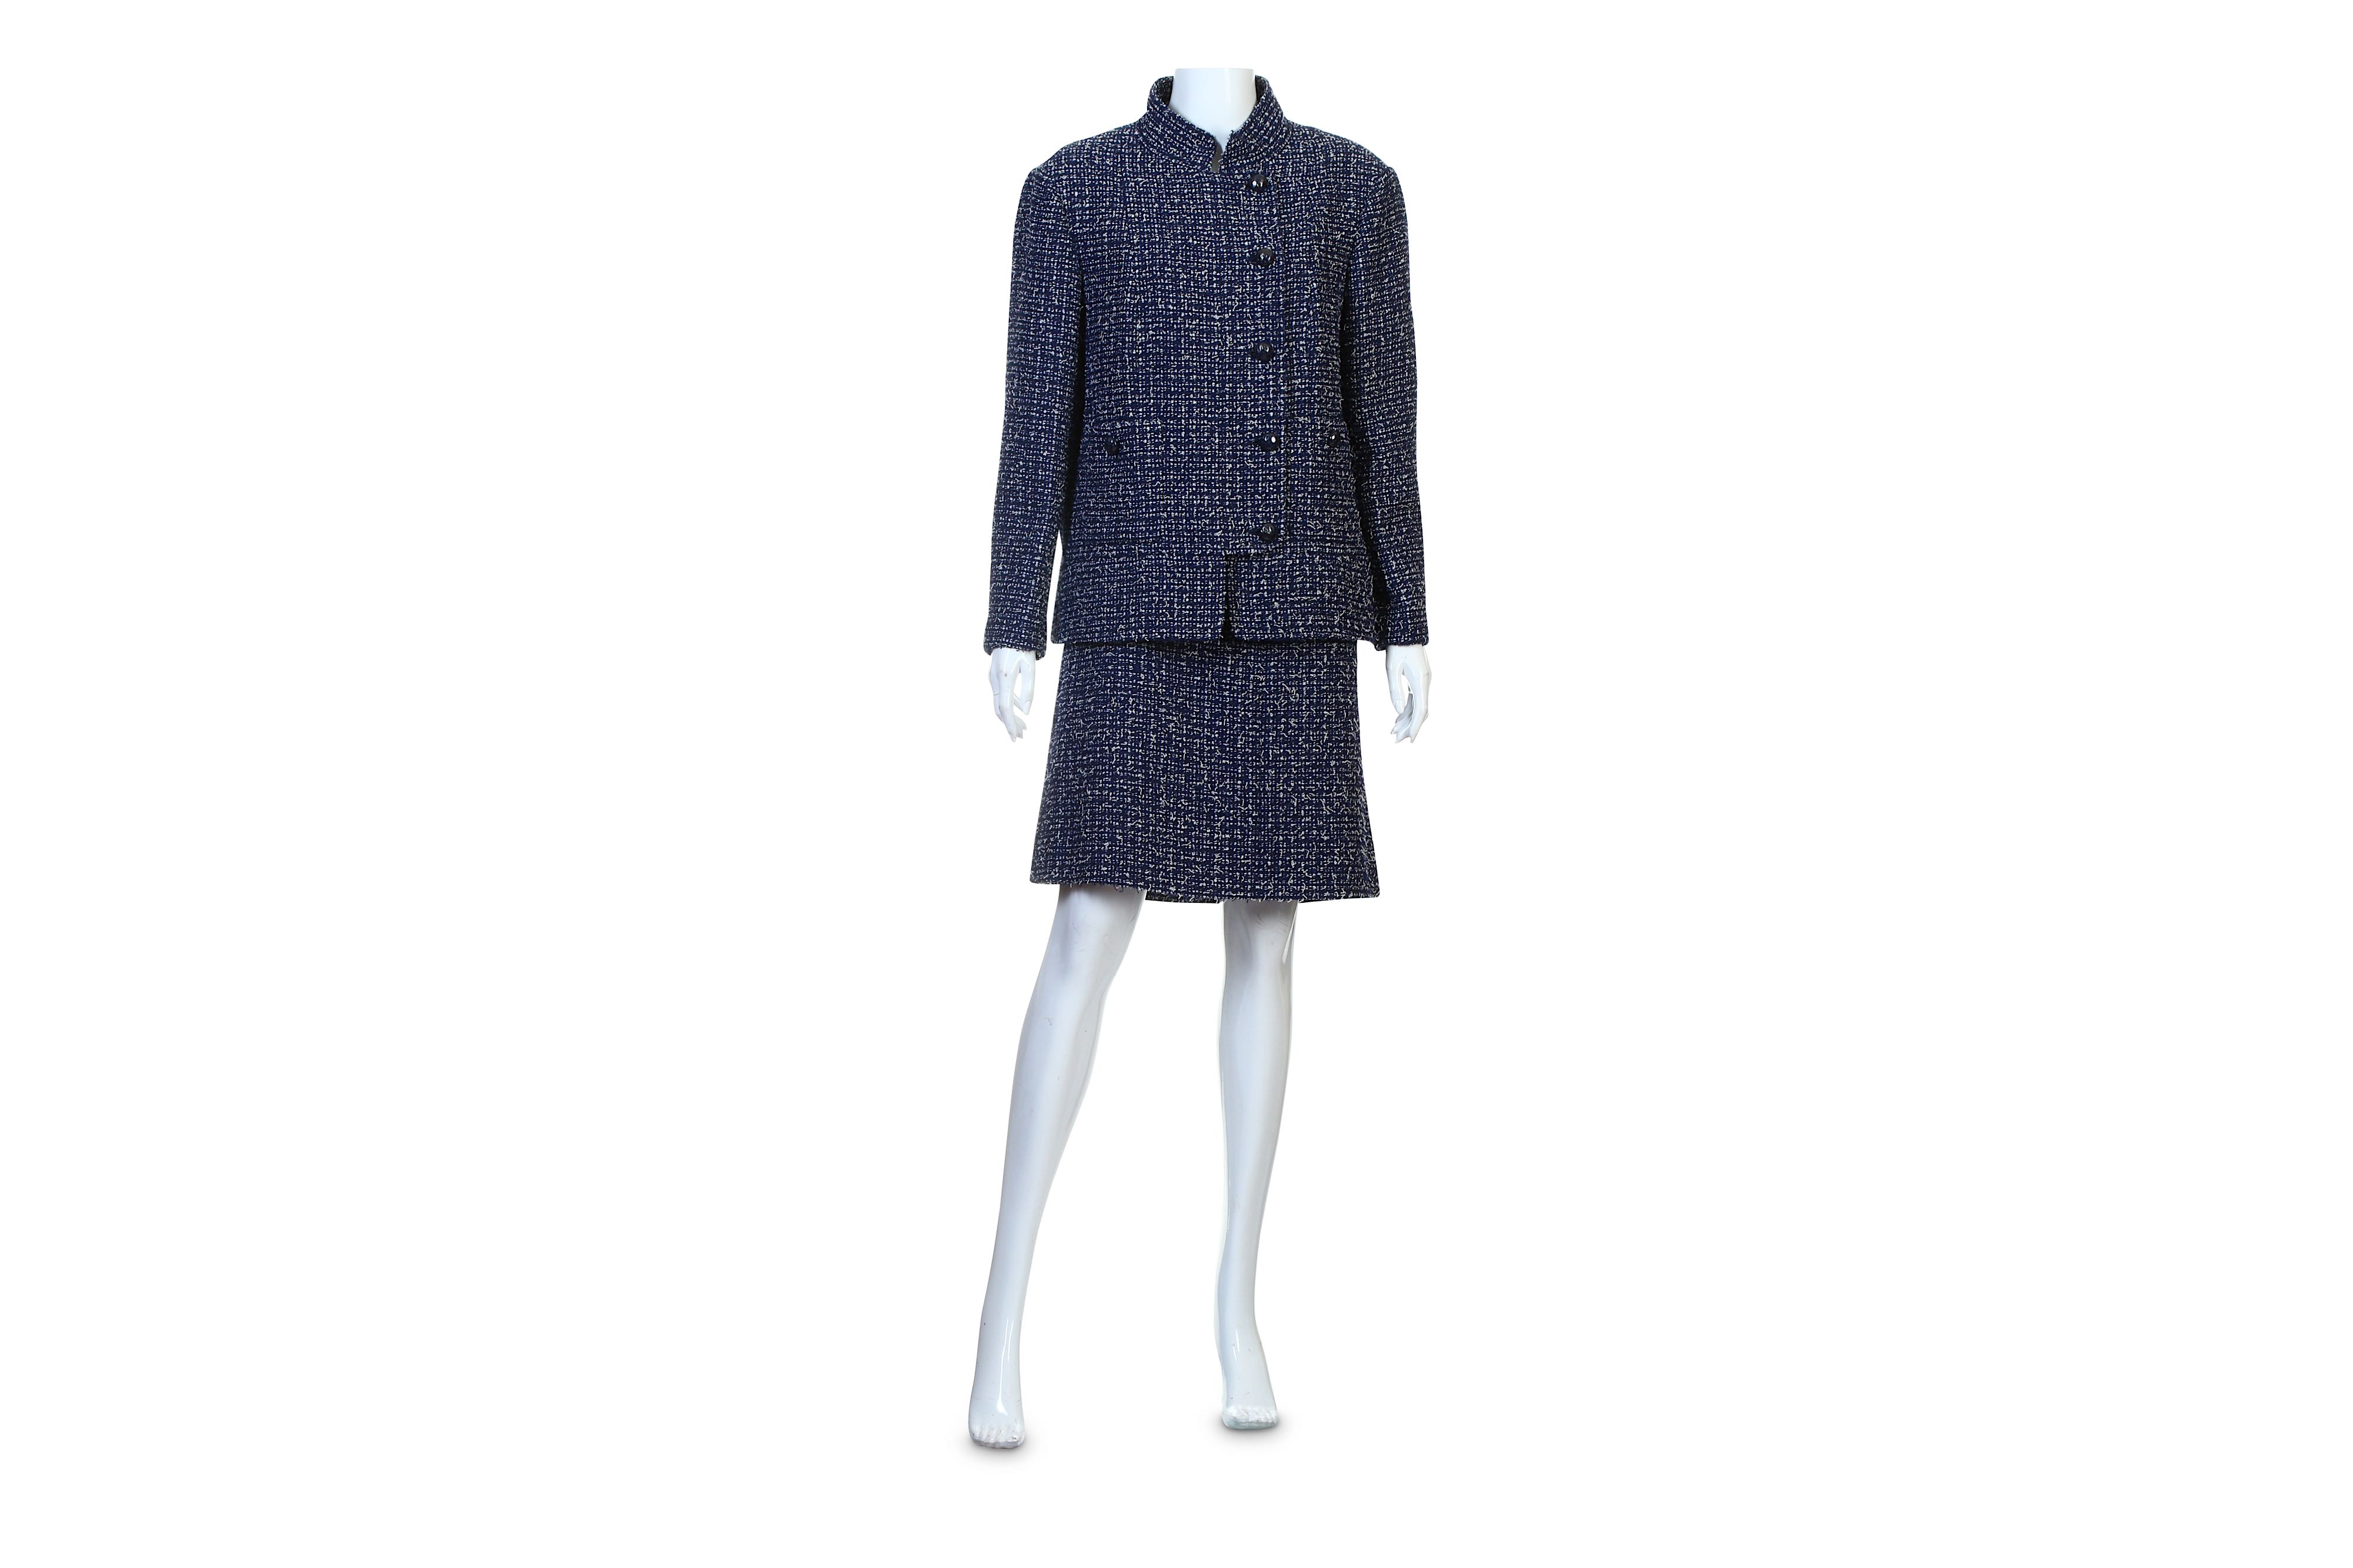 Lot 172 - Chanel Blue and White Tweed Skirt Suit